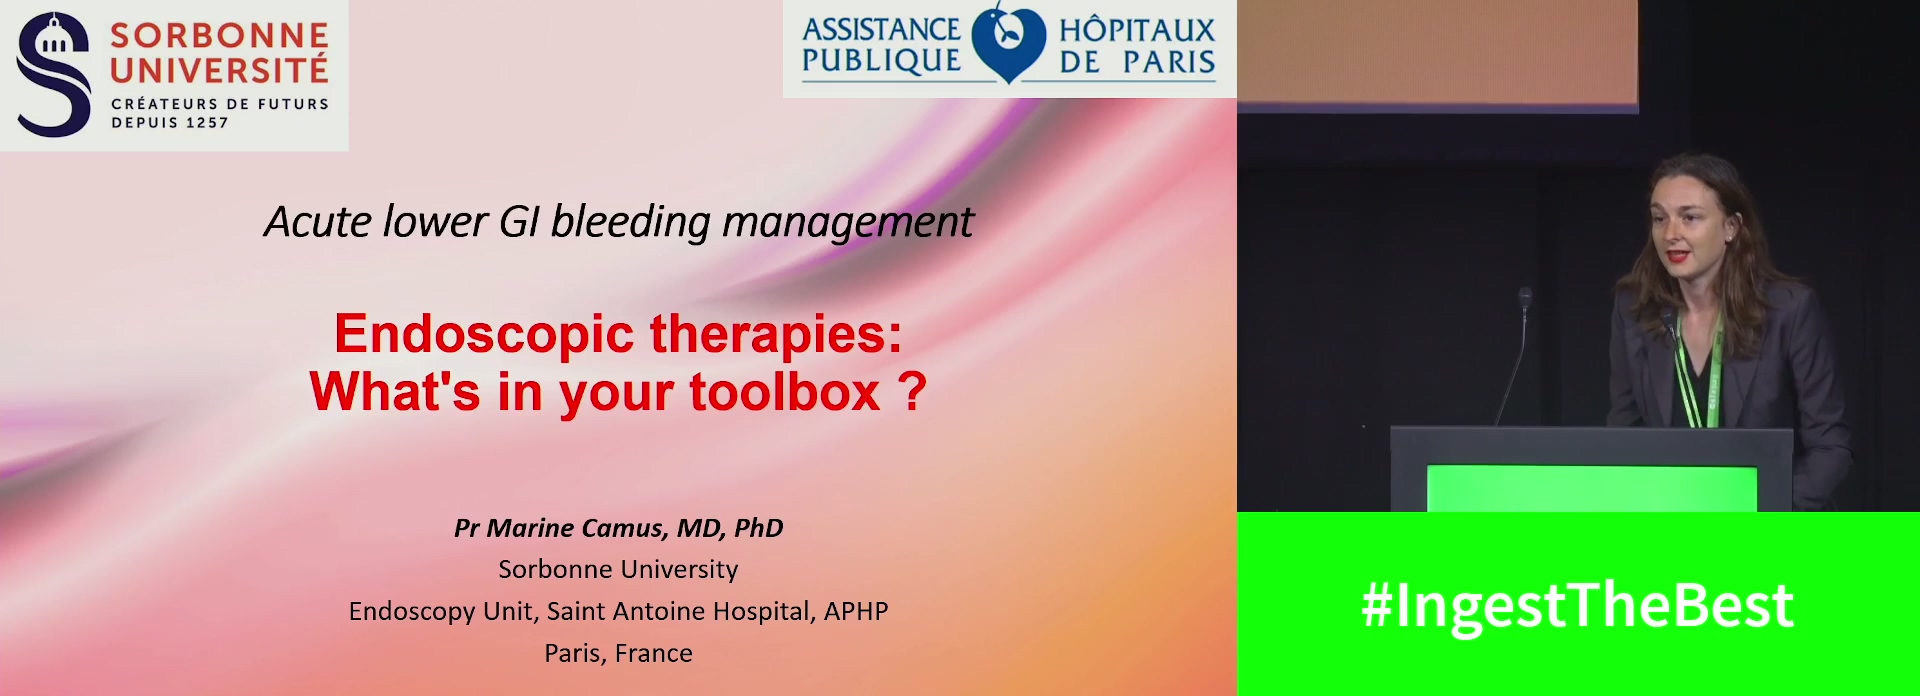 Endoscopic therapies: What's in your toolbox? / The role of the interventional radiologist